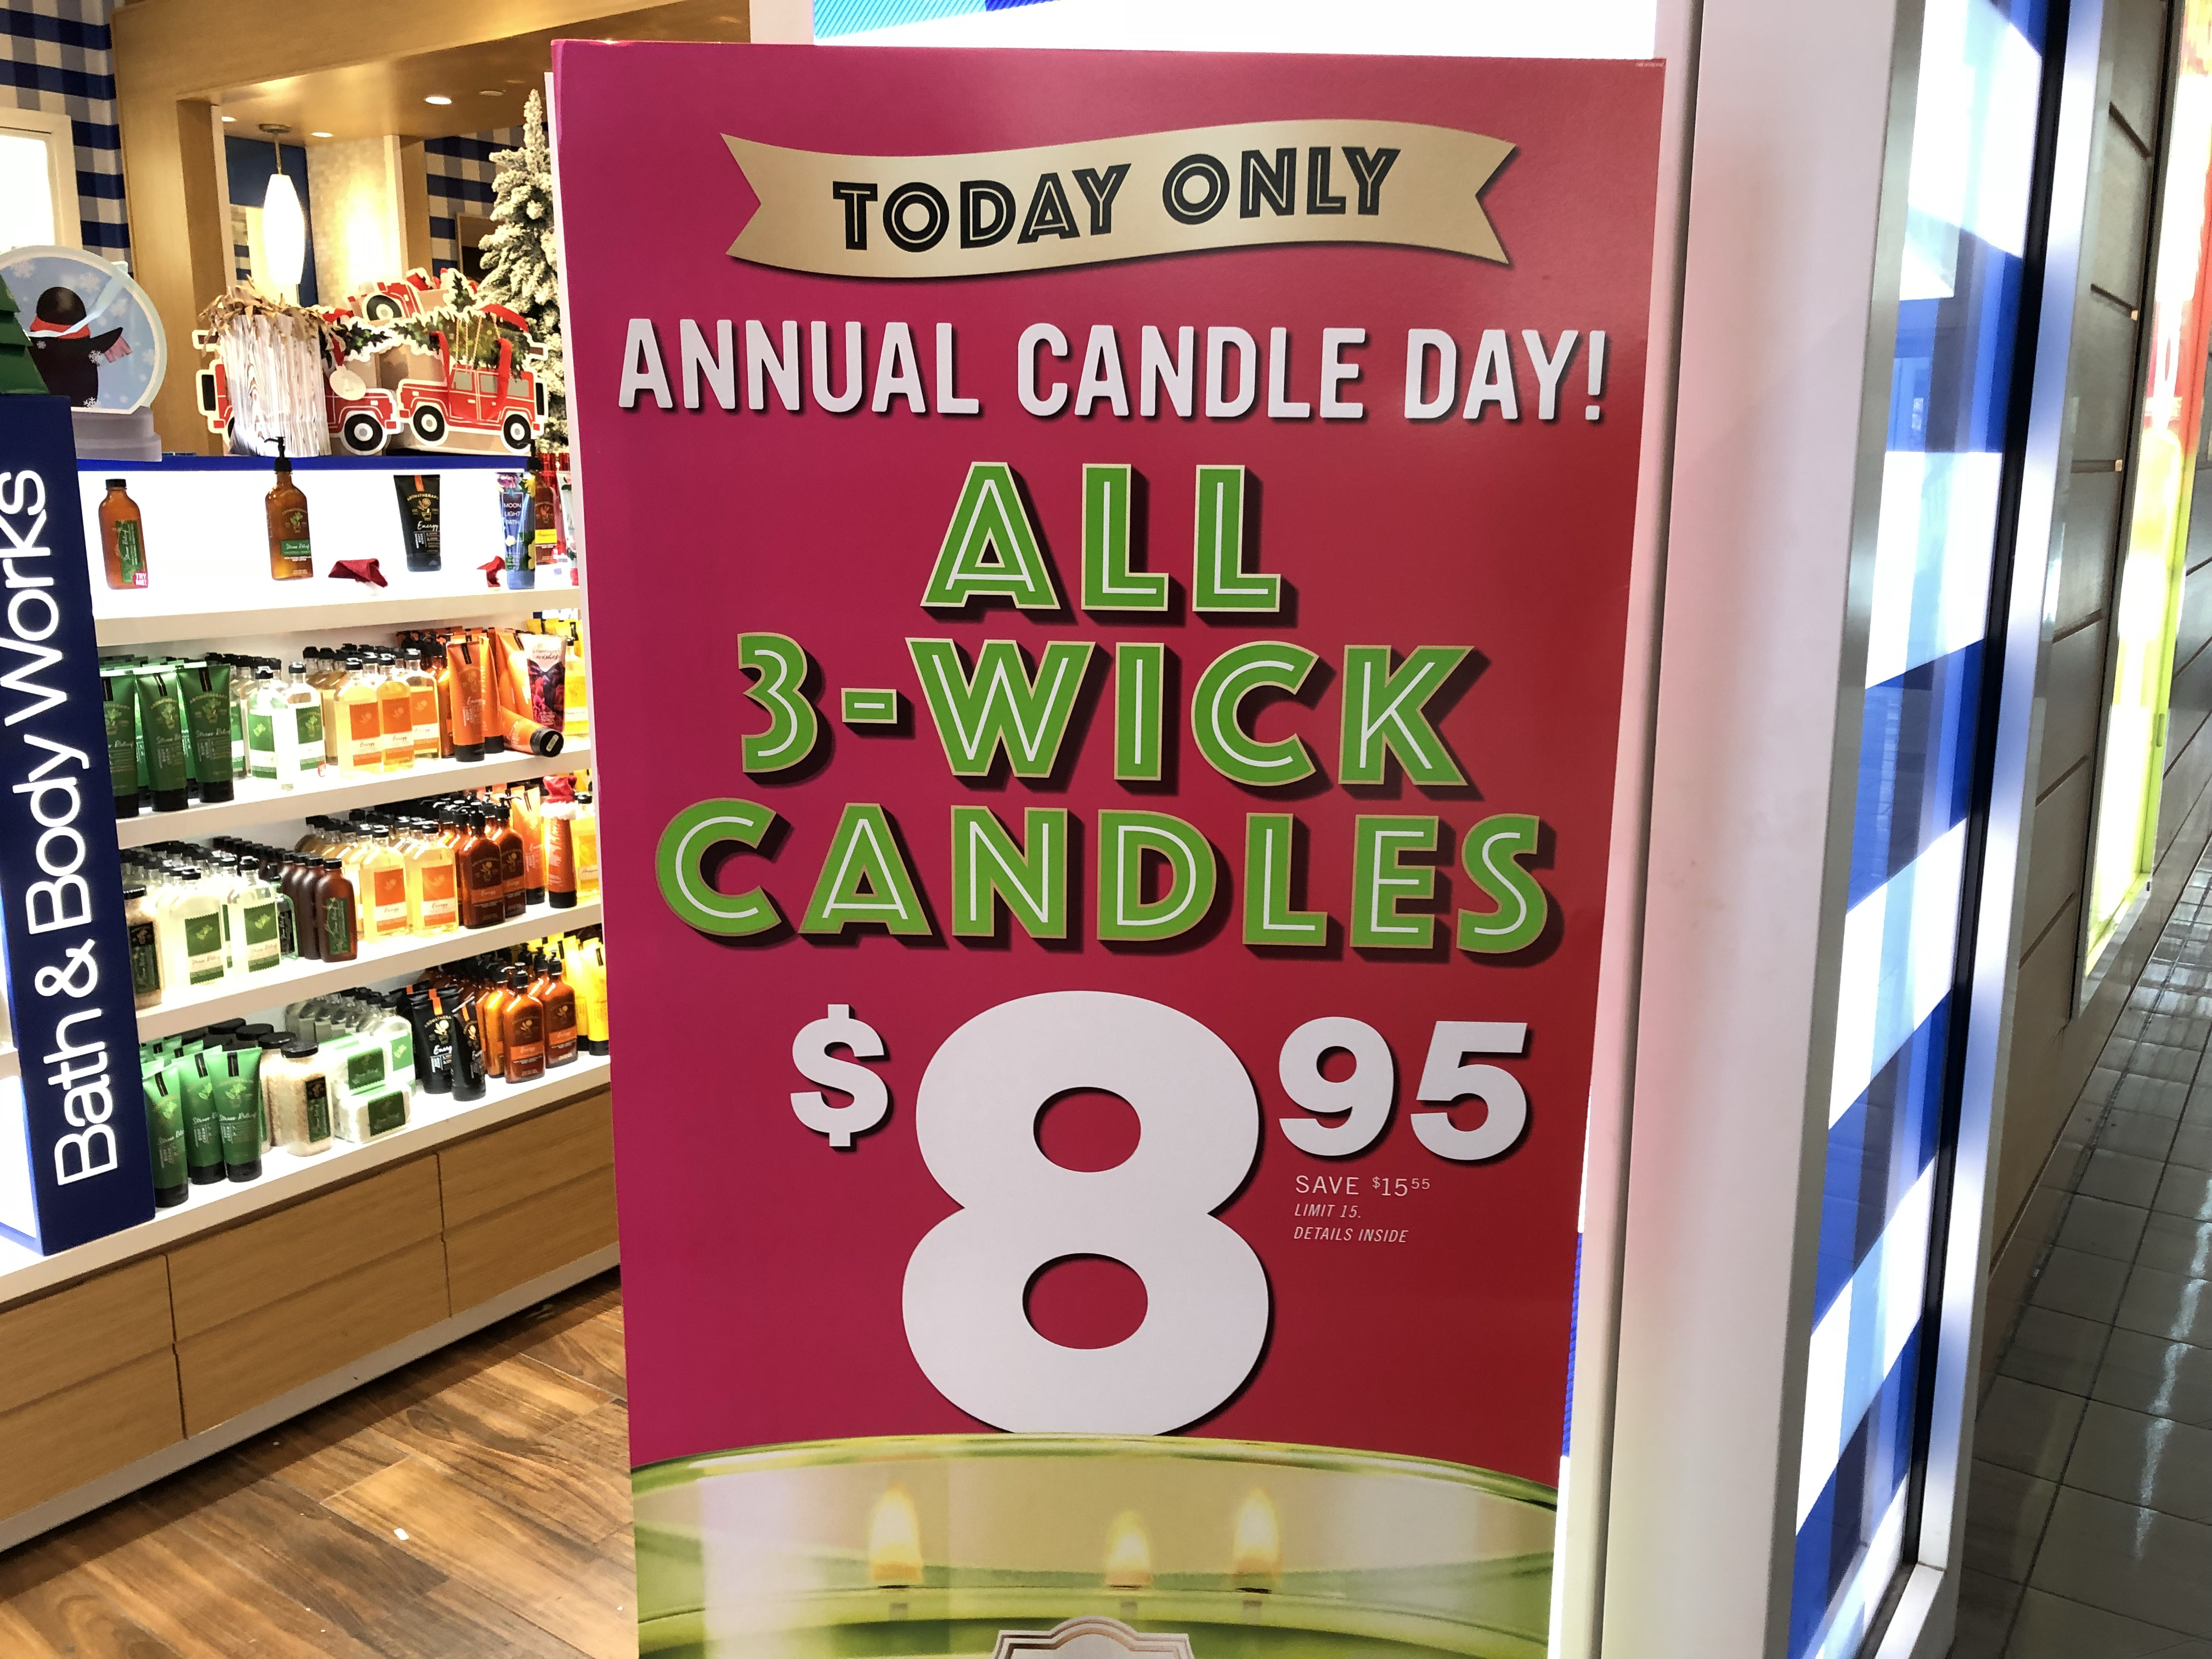 16 secrets for saving big at bath & body works – 3-wick candle sale